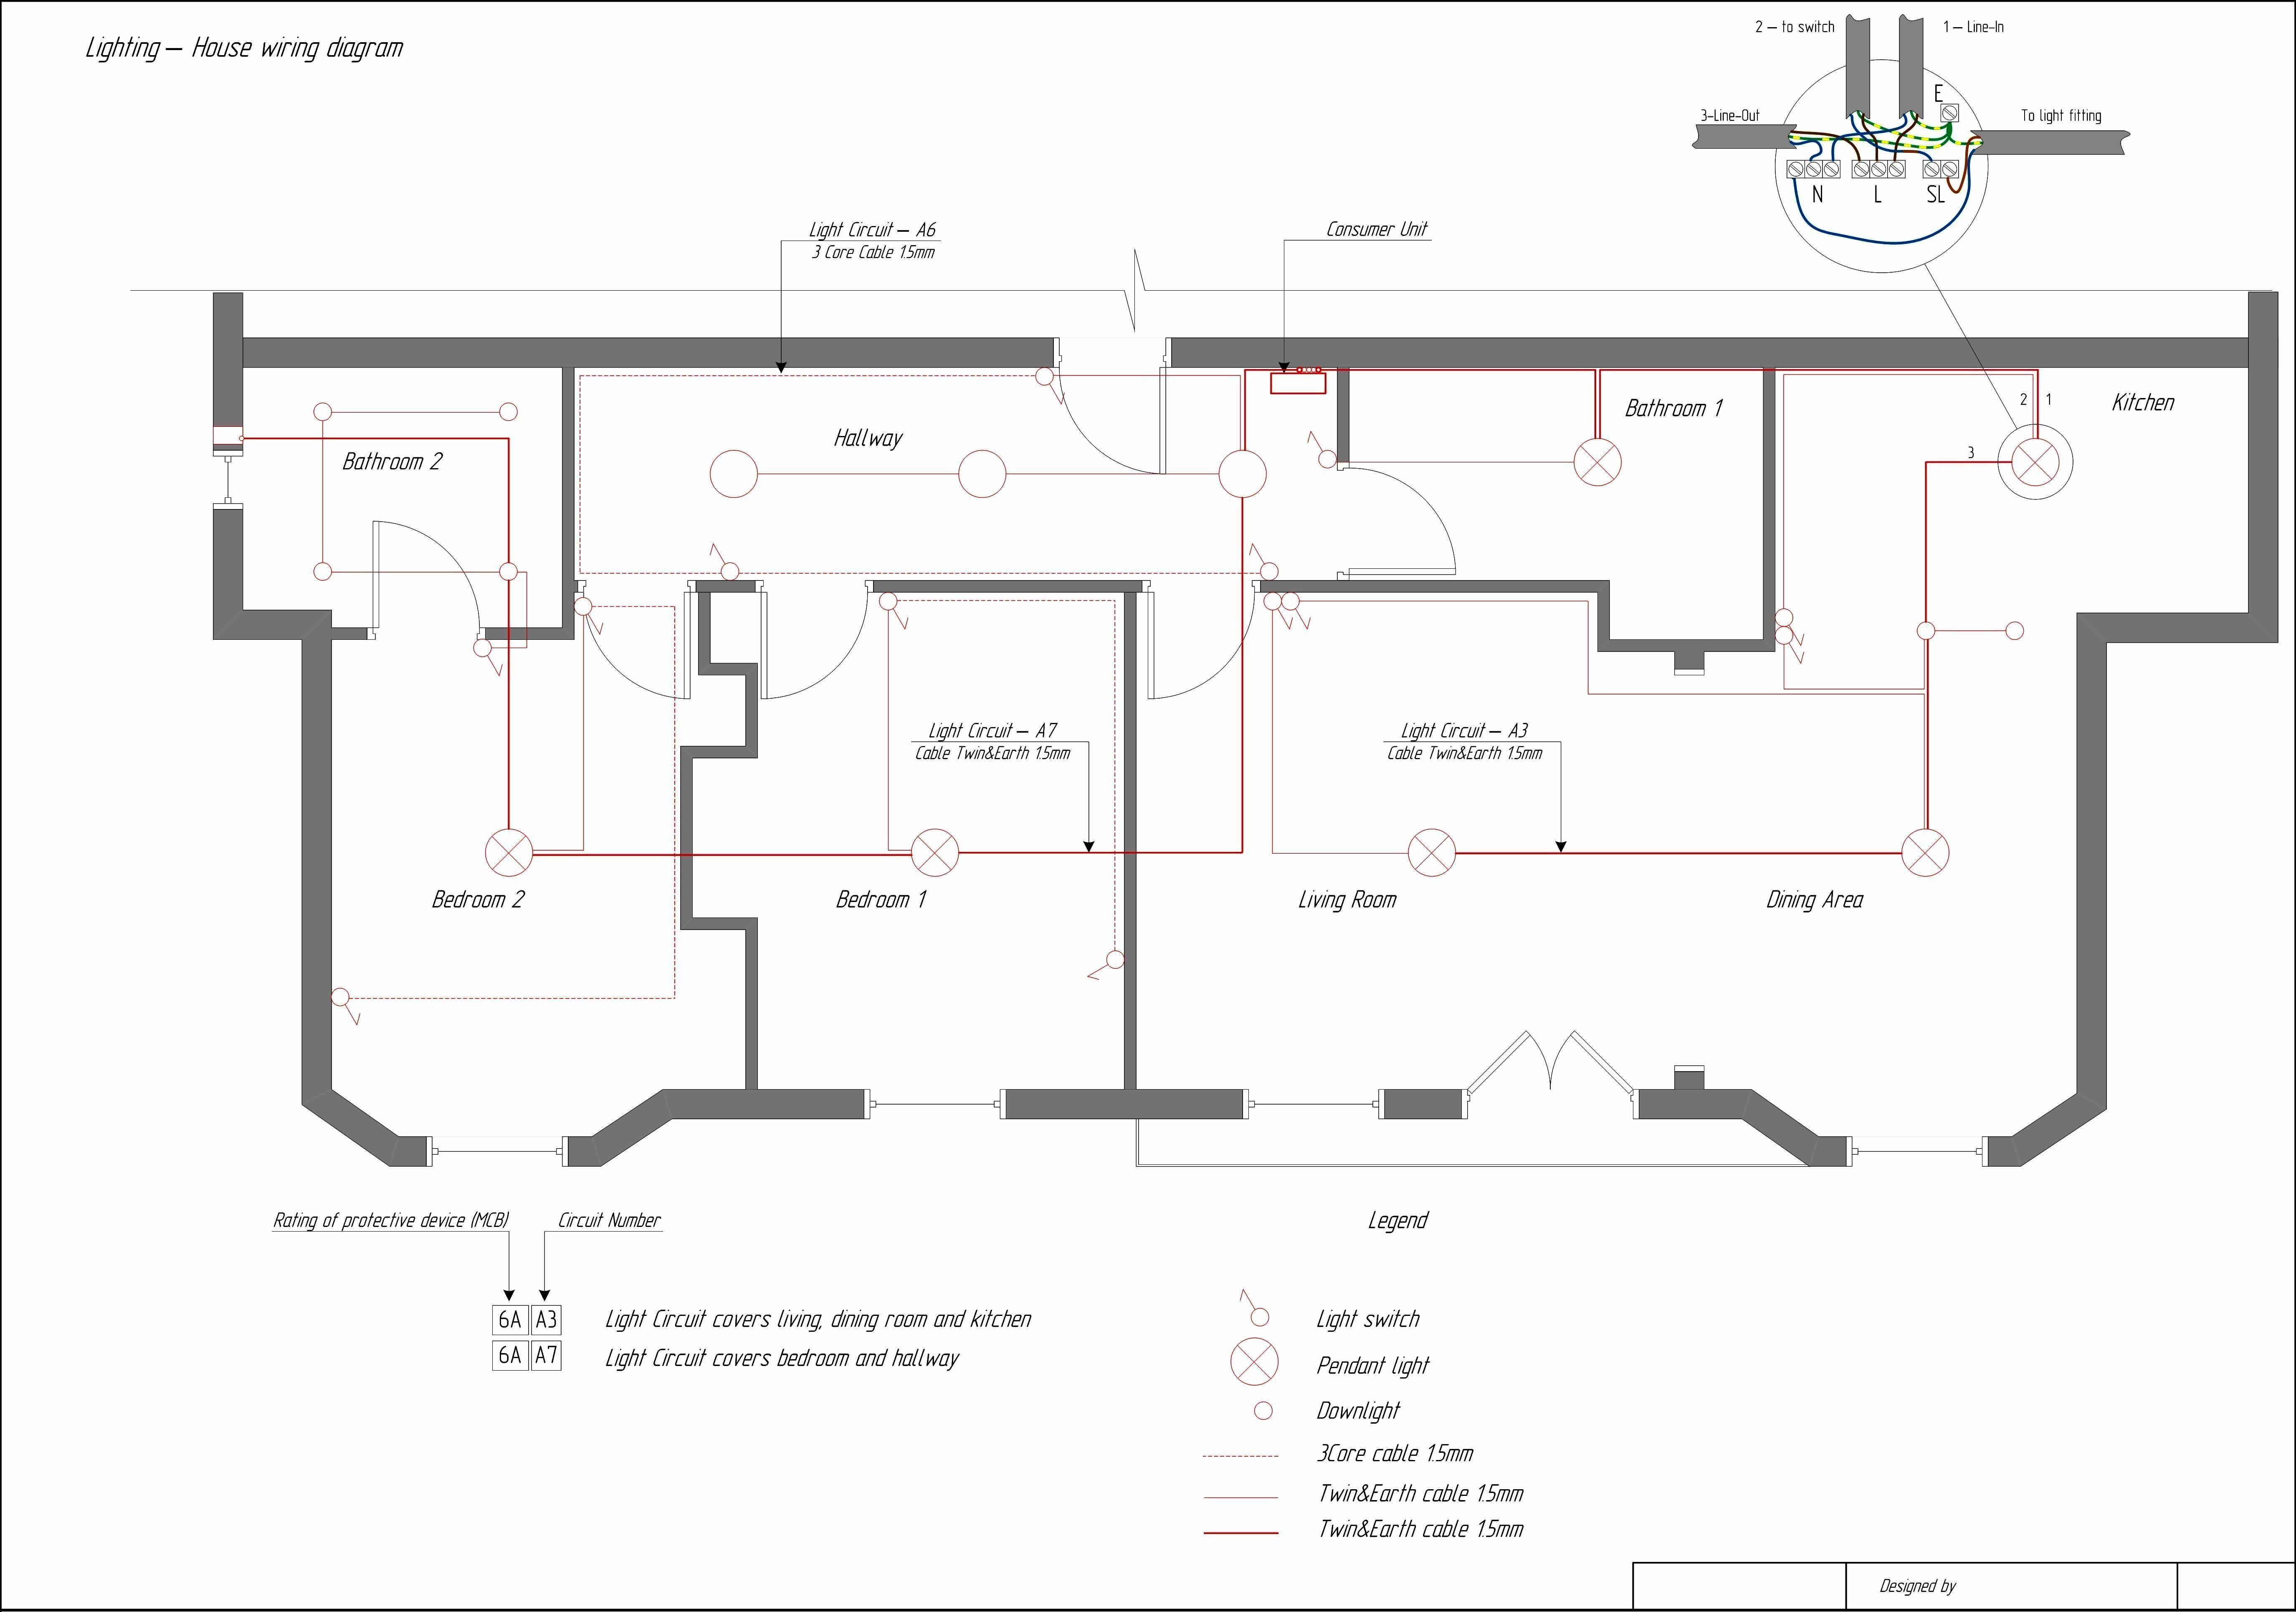 Wiring 3 Prong Schematic - Data Wiring Diagram Site - 3 Prong Outlet Wiring Diagram